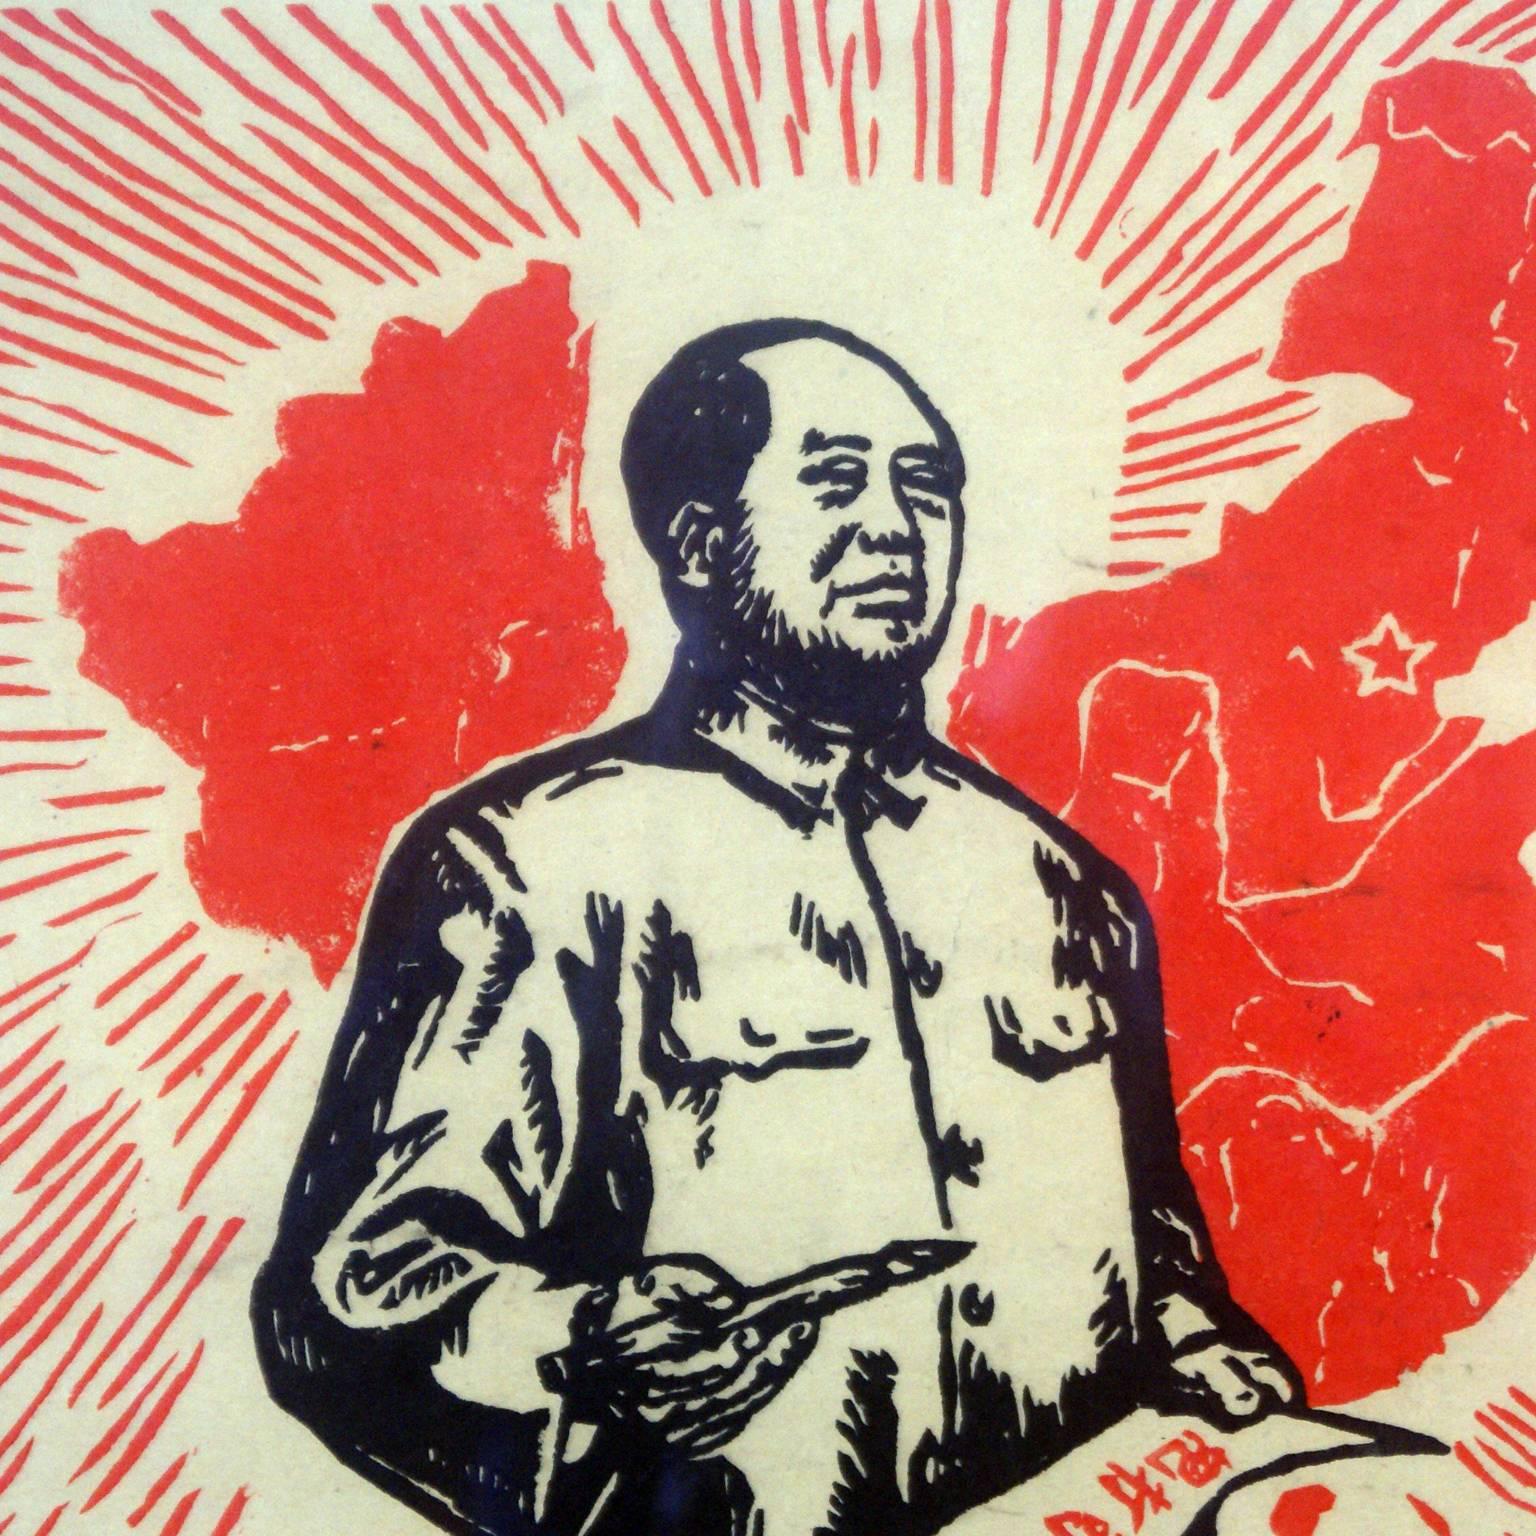 1960s Chinese propaganda poster featuring a standing Mao Zedong writing a political slogan. The phrase running across the bottom of the poster translates as “Fire Control Room”
Black and red print on rough paper. The item is mounted and framed